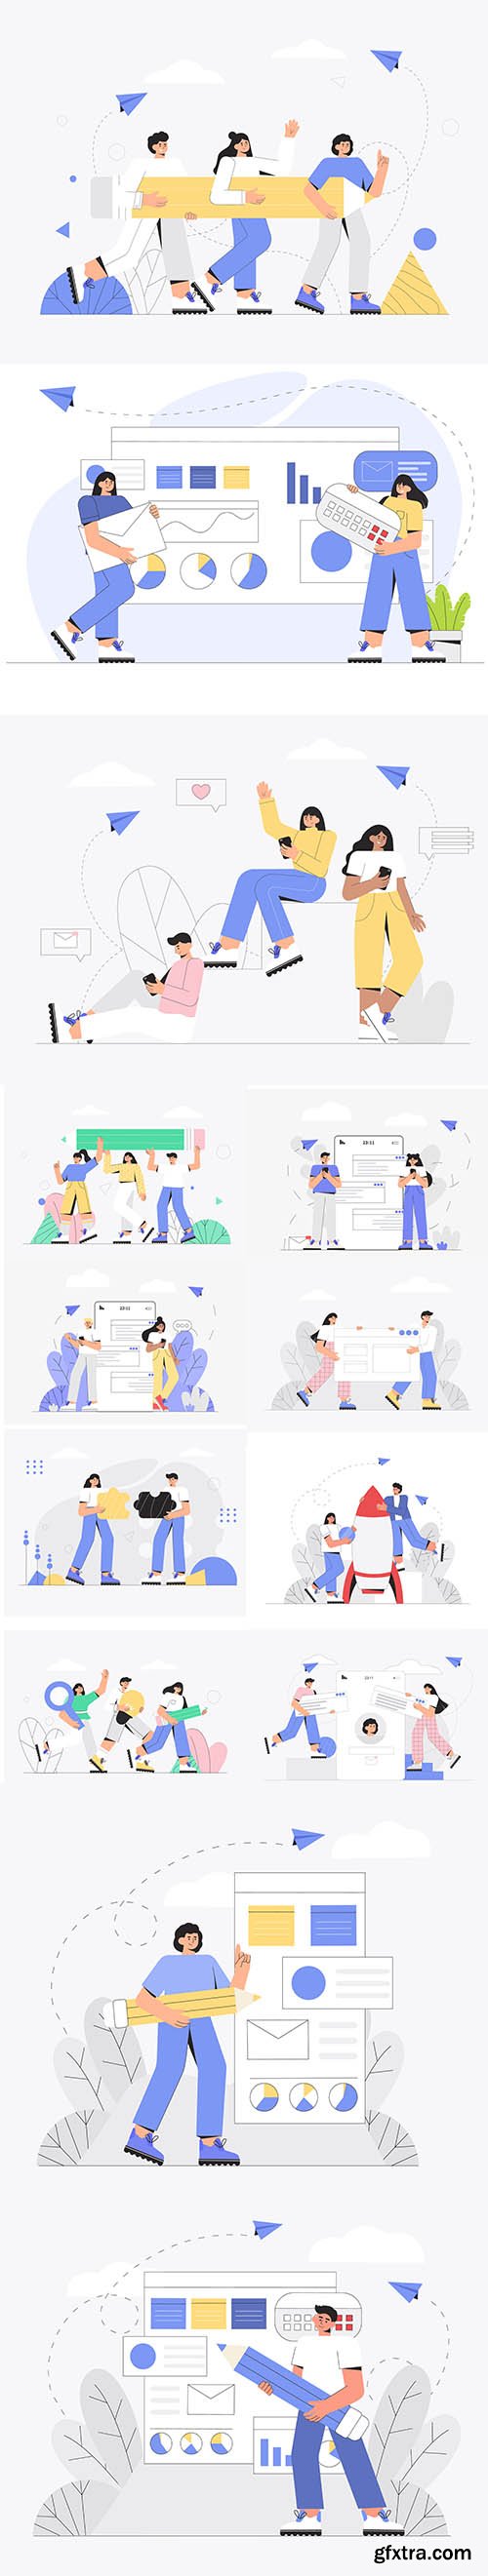 Business People Concept Illustration